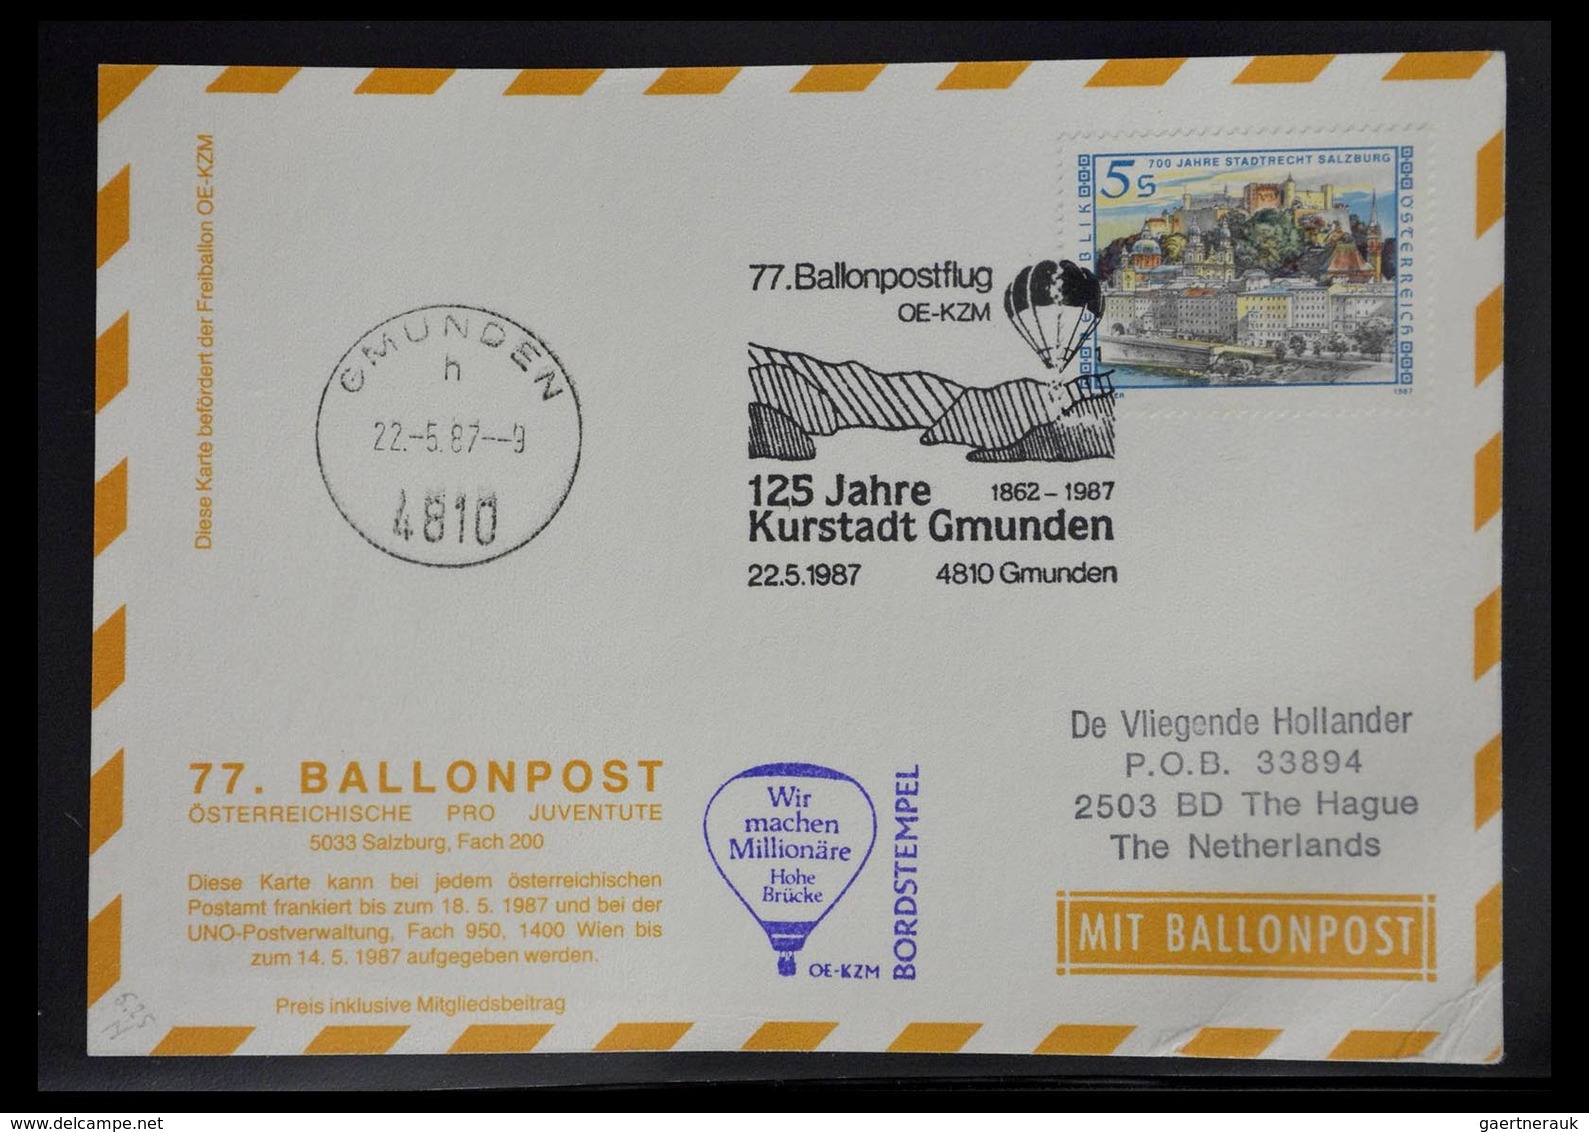 Ballonpost: 1927-2001: Nice collection of over 650 balloonpost covers of a.o. Netherlands, USA, Grea